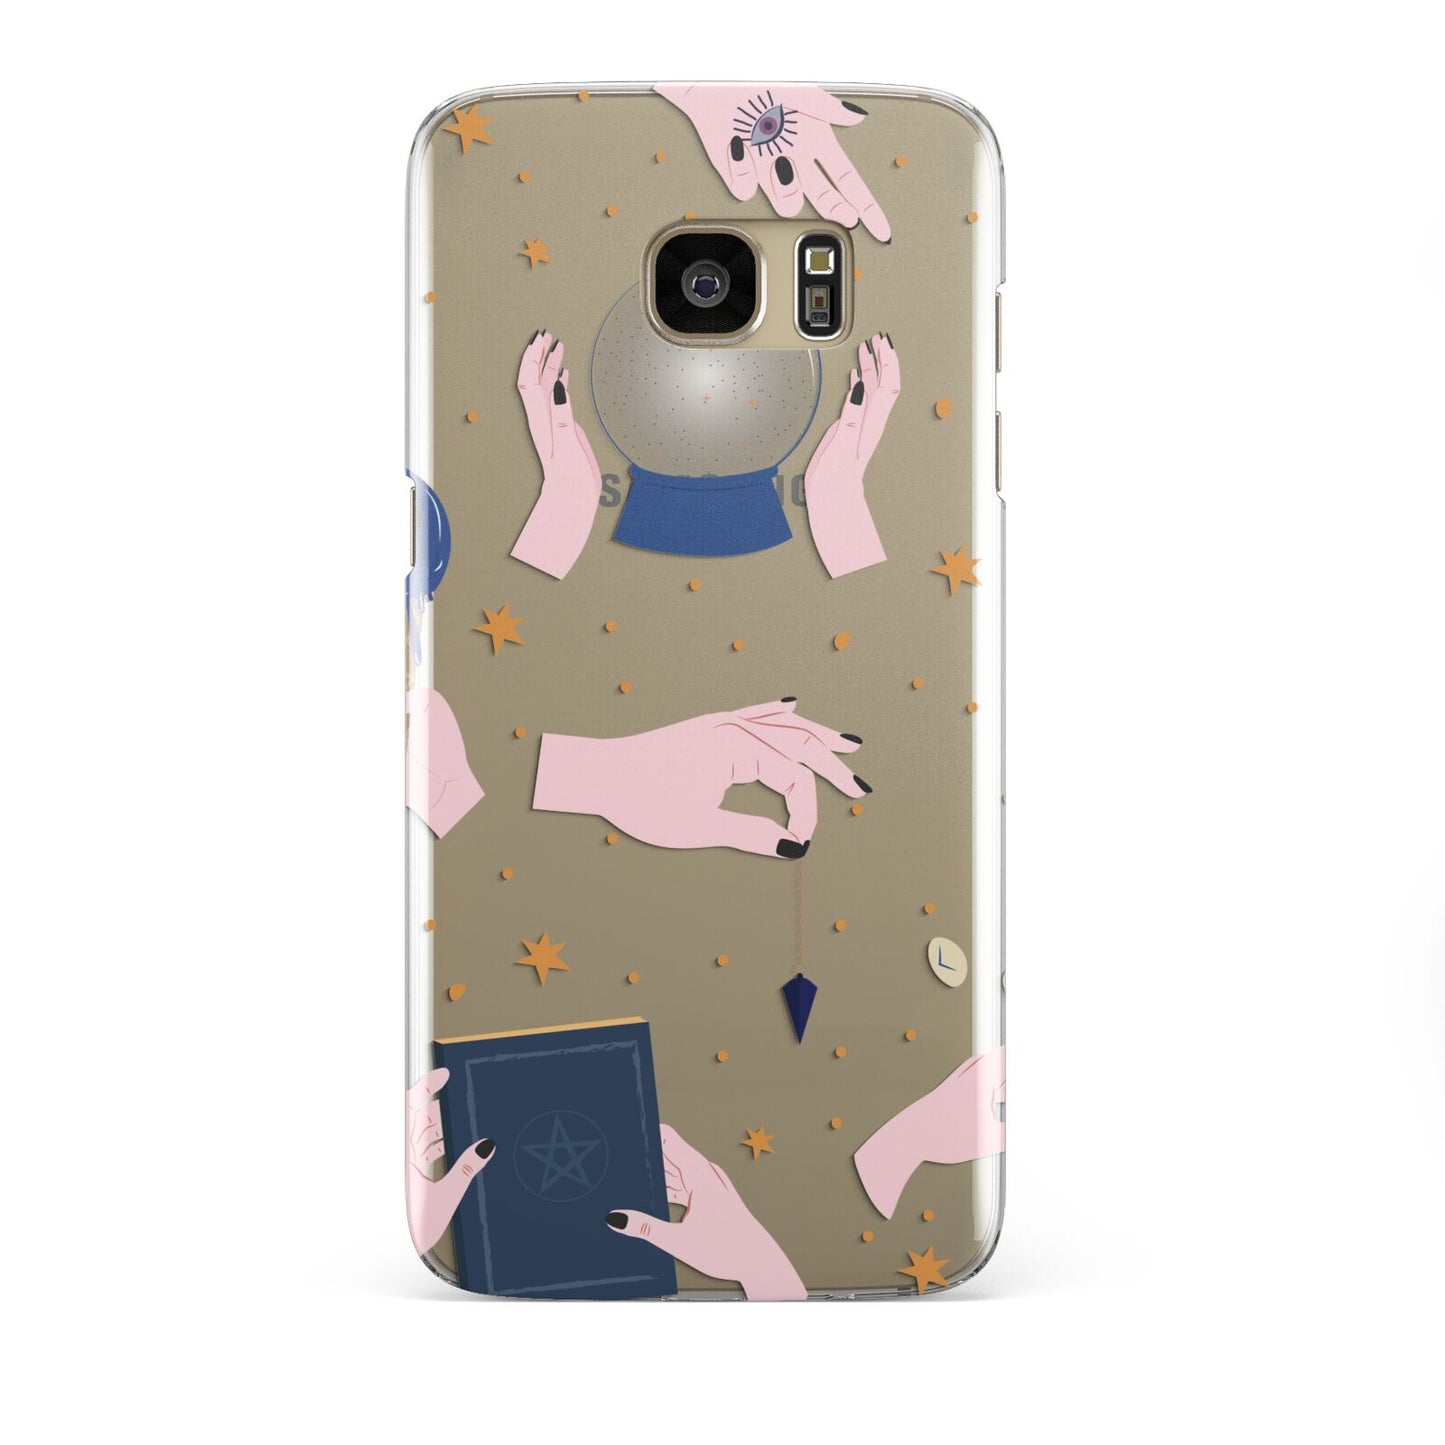 Clairvoyant Witches Hands Samsung Galaxy S7 Edge Case